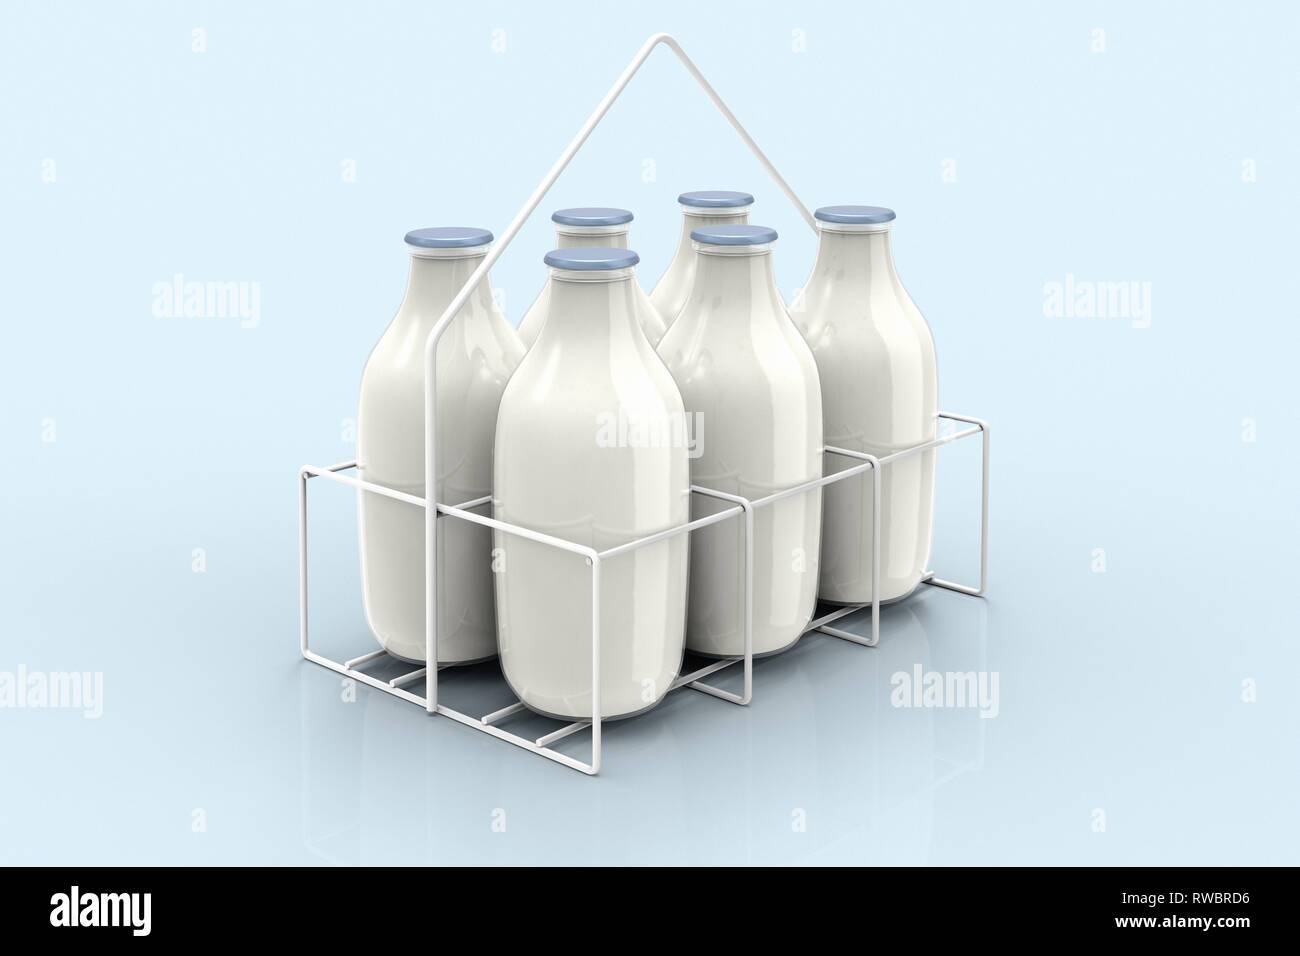 3D rendering of milk bottles for delivery Stock Photo